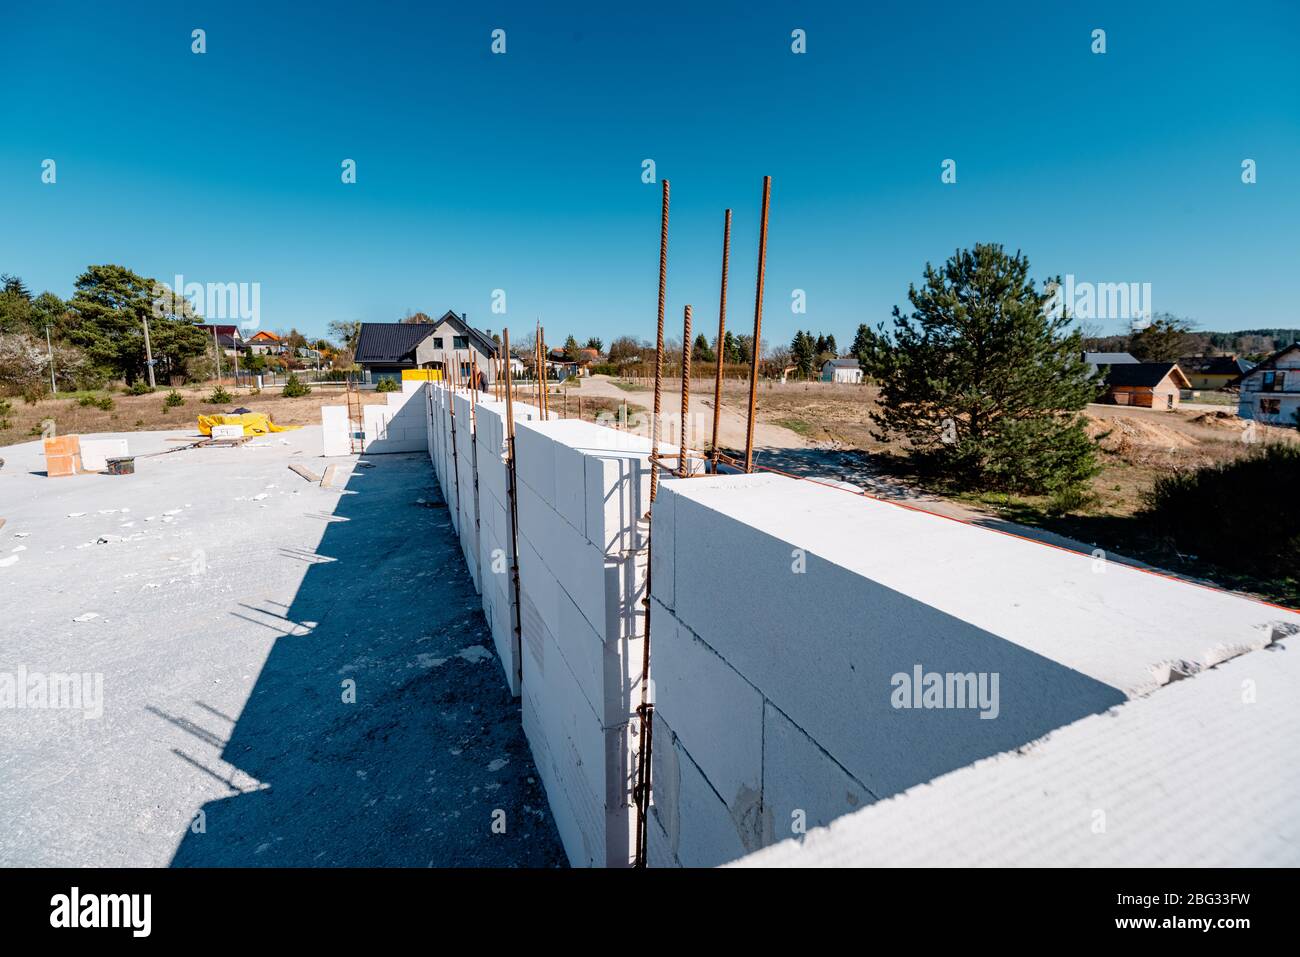 Construction site of a new single-family house Stock Photo